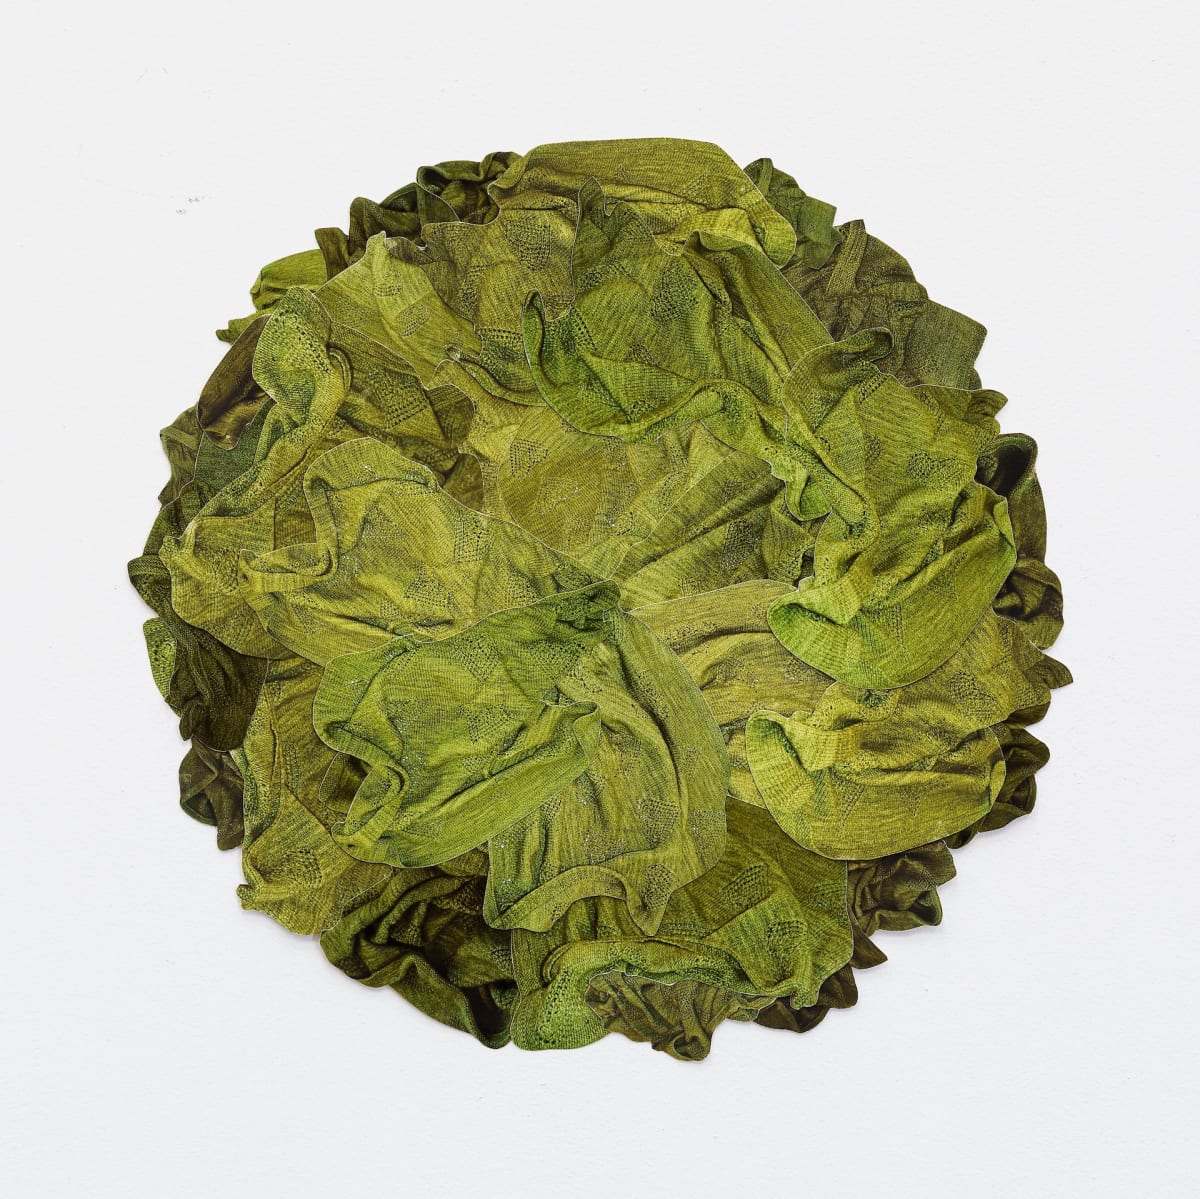 Moss by Mira Burack  Image: Moss, Photography collage (photographs of baby blanket), paint, 30" x 30" (framed), 2020
